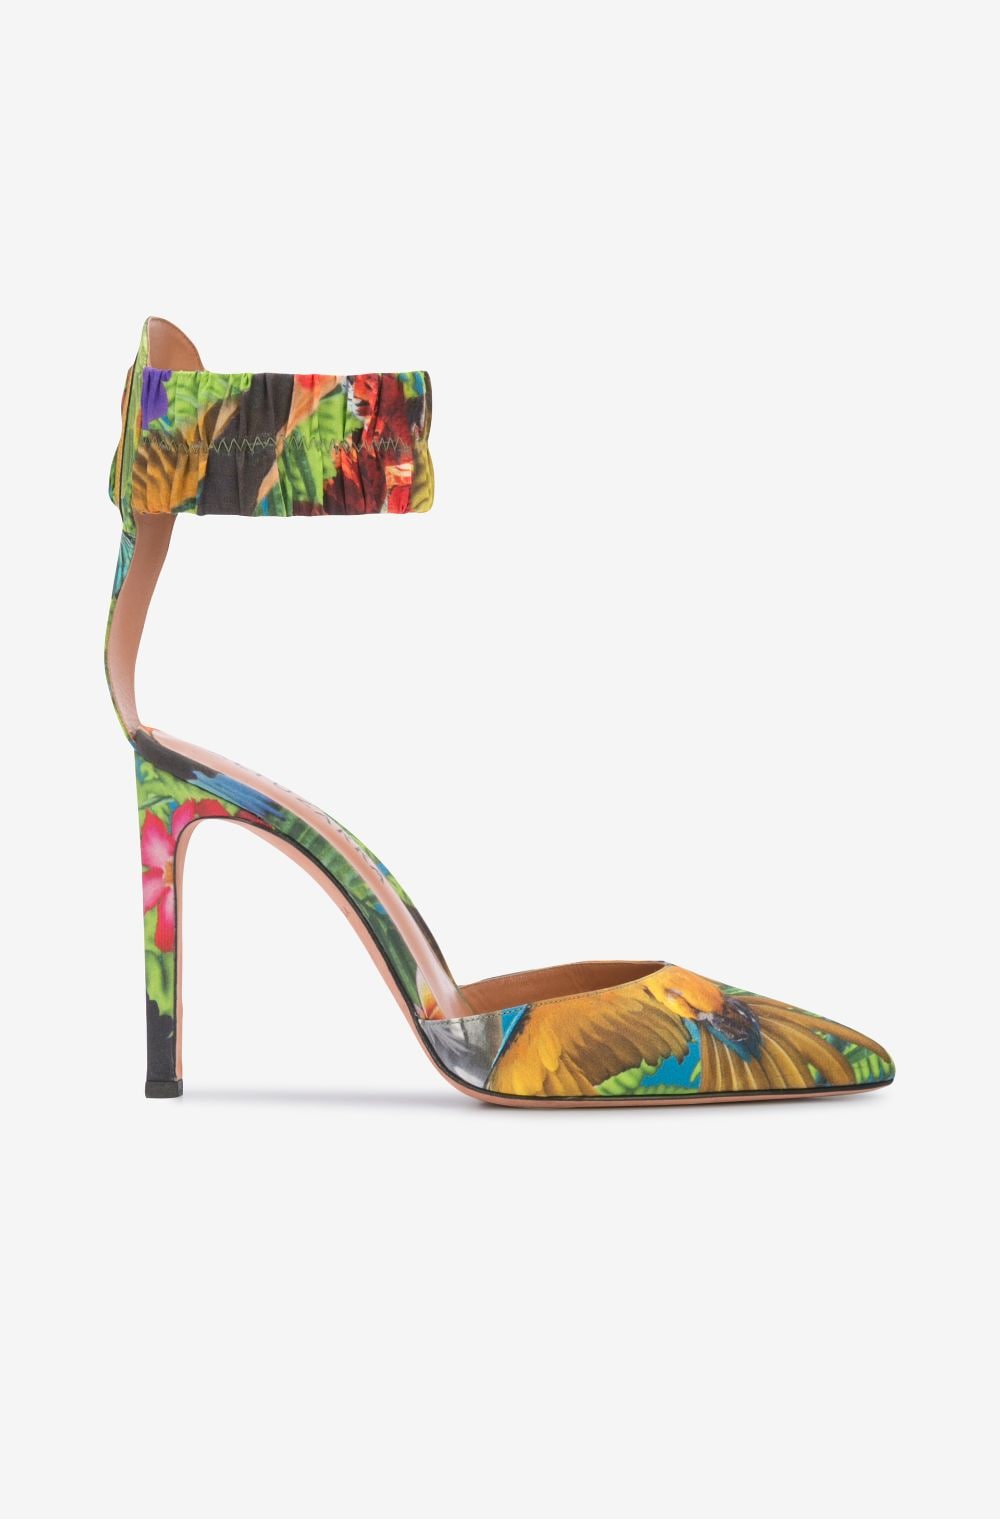 'Bird of Paradise' Printed Pumps in 